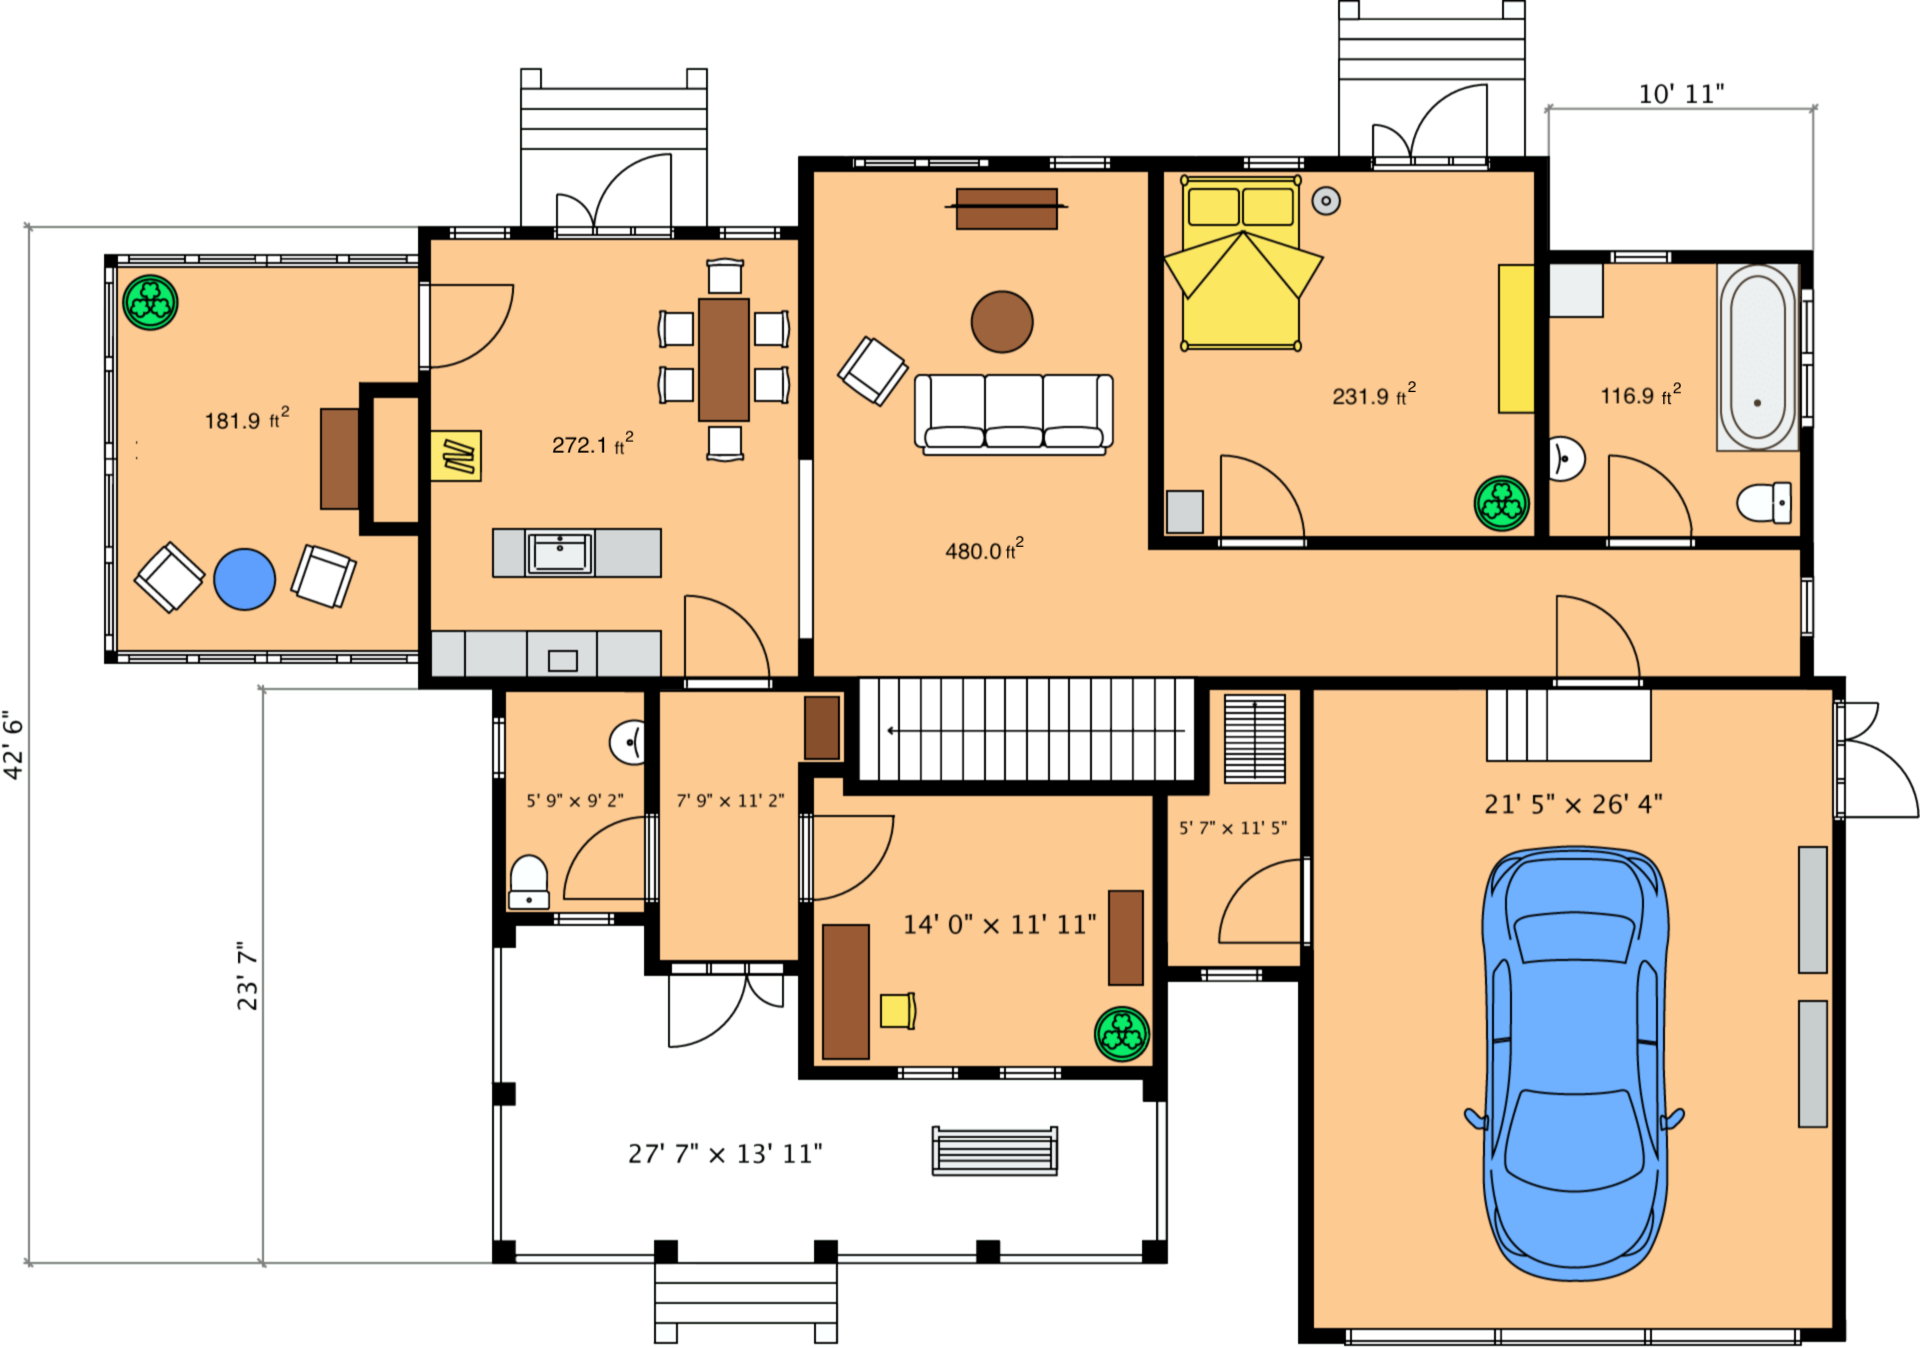 What's the best "Floor Plan" software? - Airbnb Community